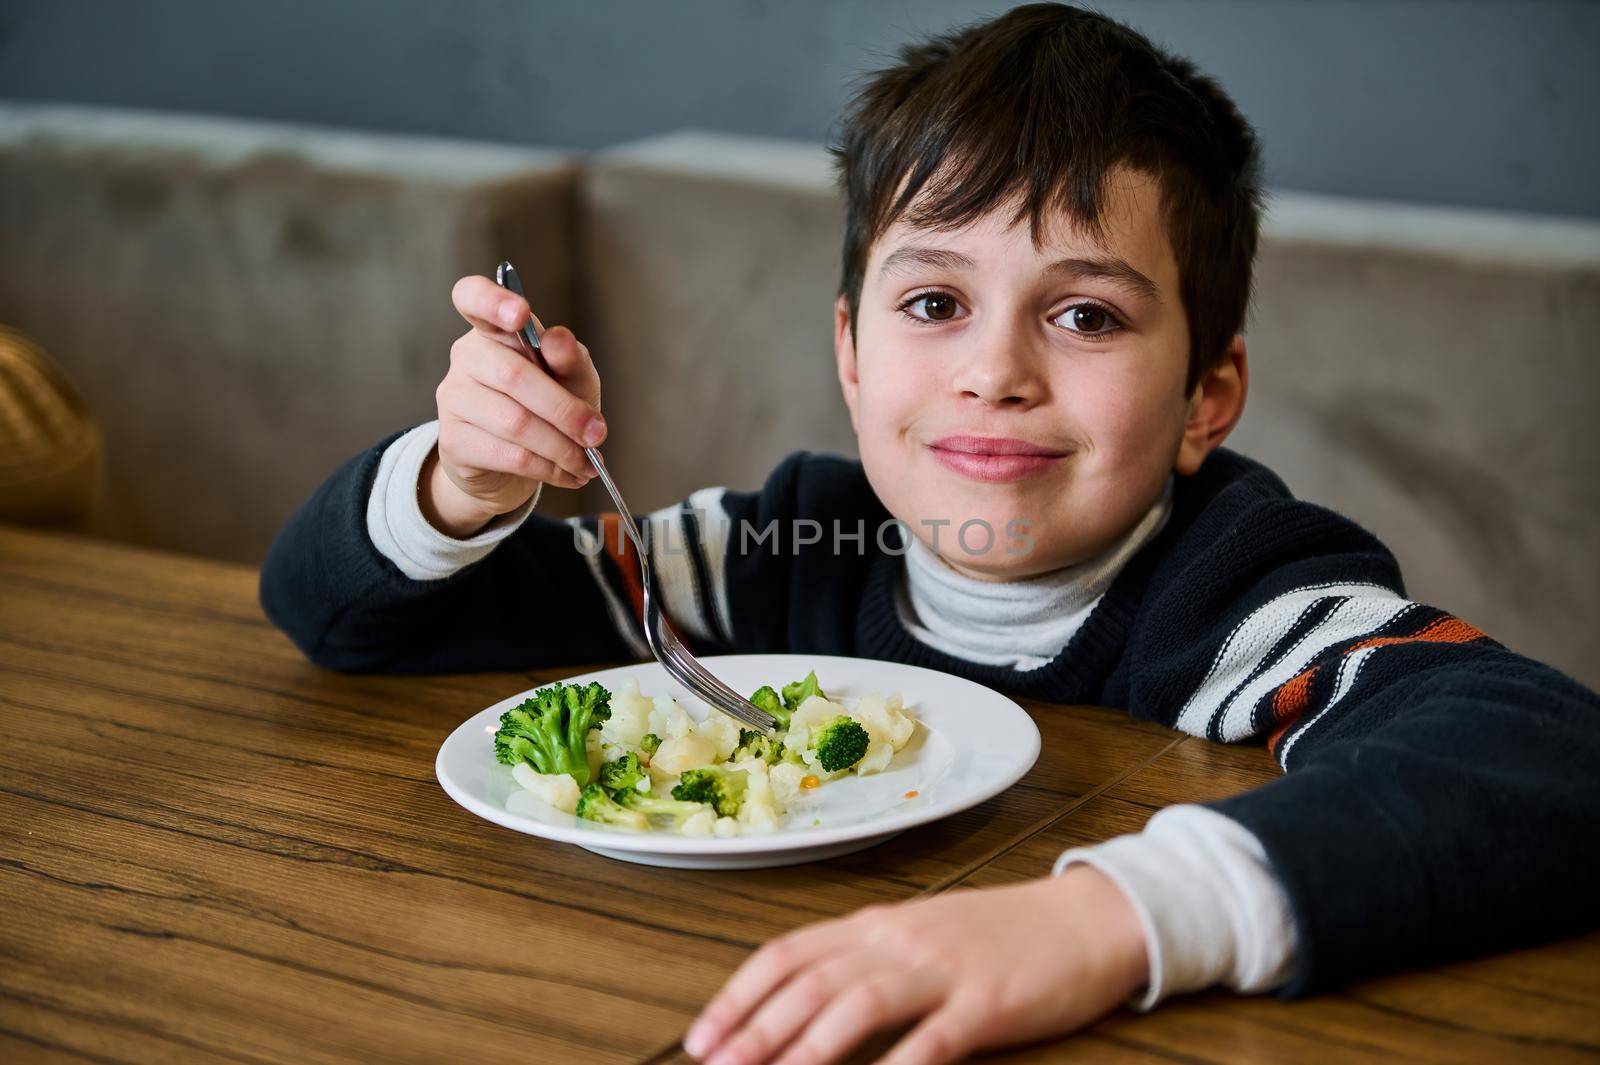 Handsome dark-haired Caucasian school age boy eating healthy vegan meal- steamed vegetables in a canteen and cutely smiling looking at camera